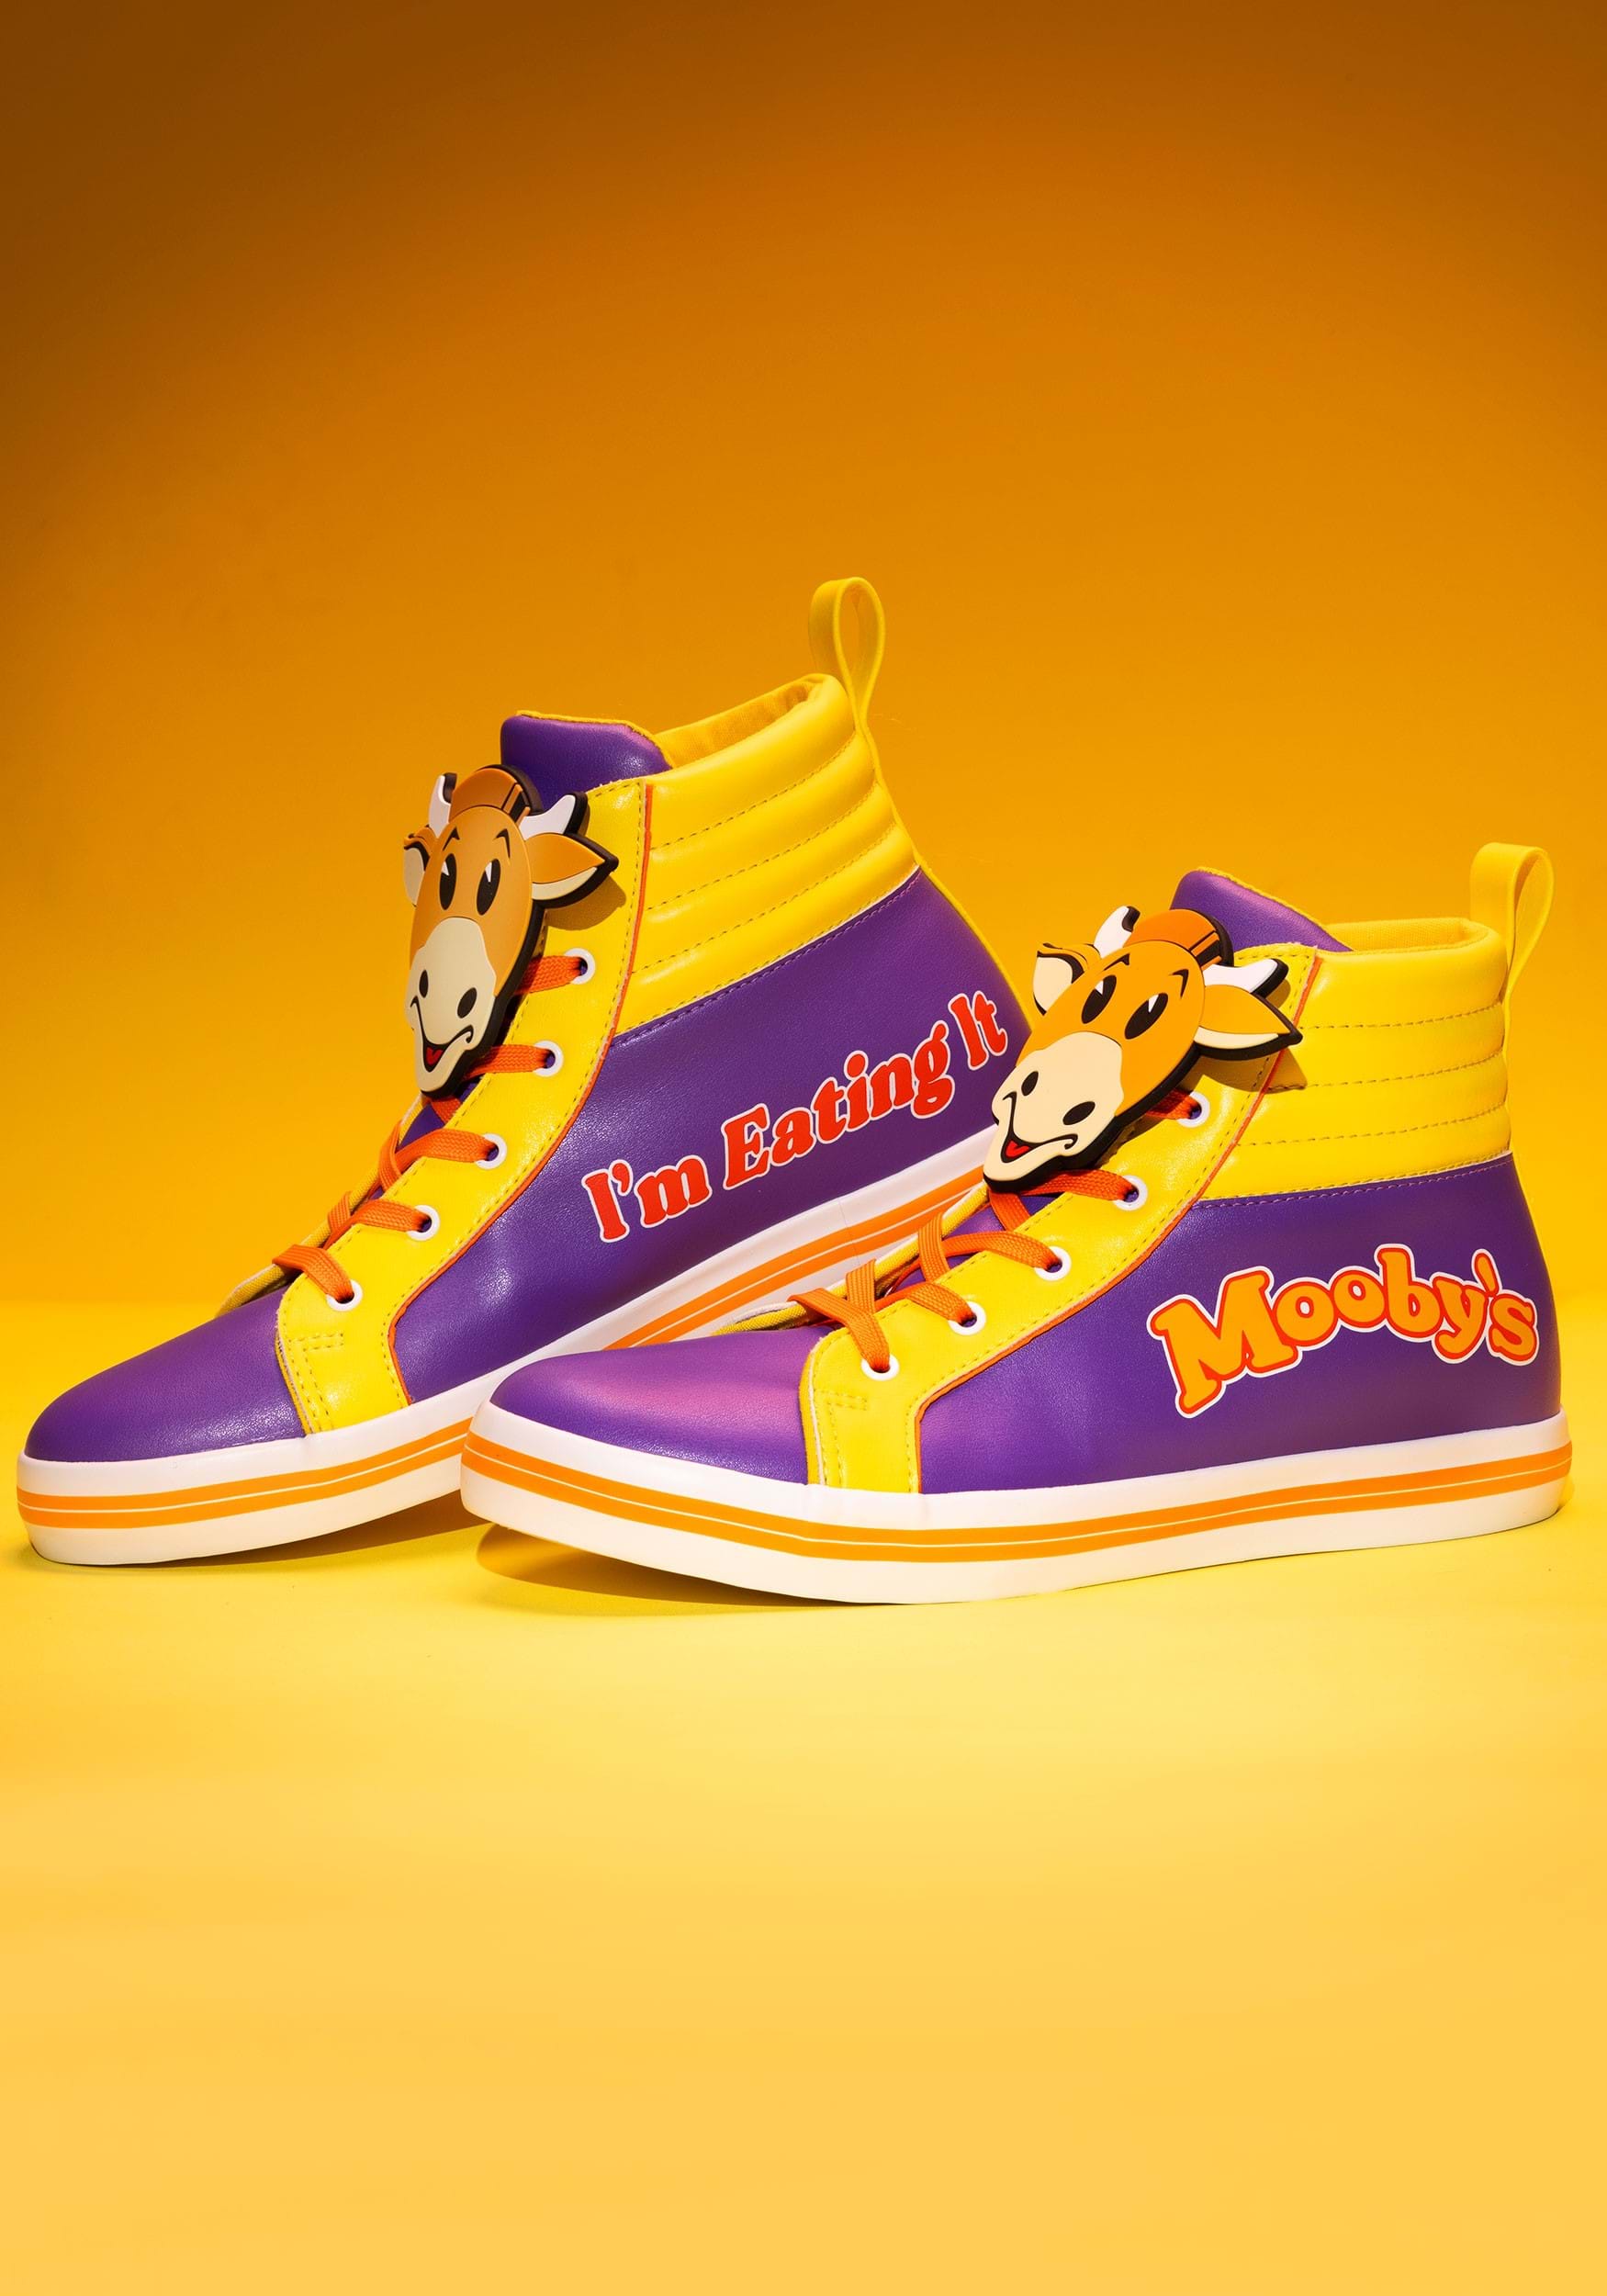 Mooby's Jay And Silent Bob Shoes